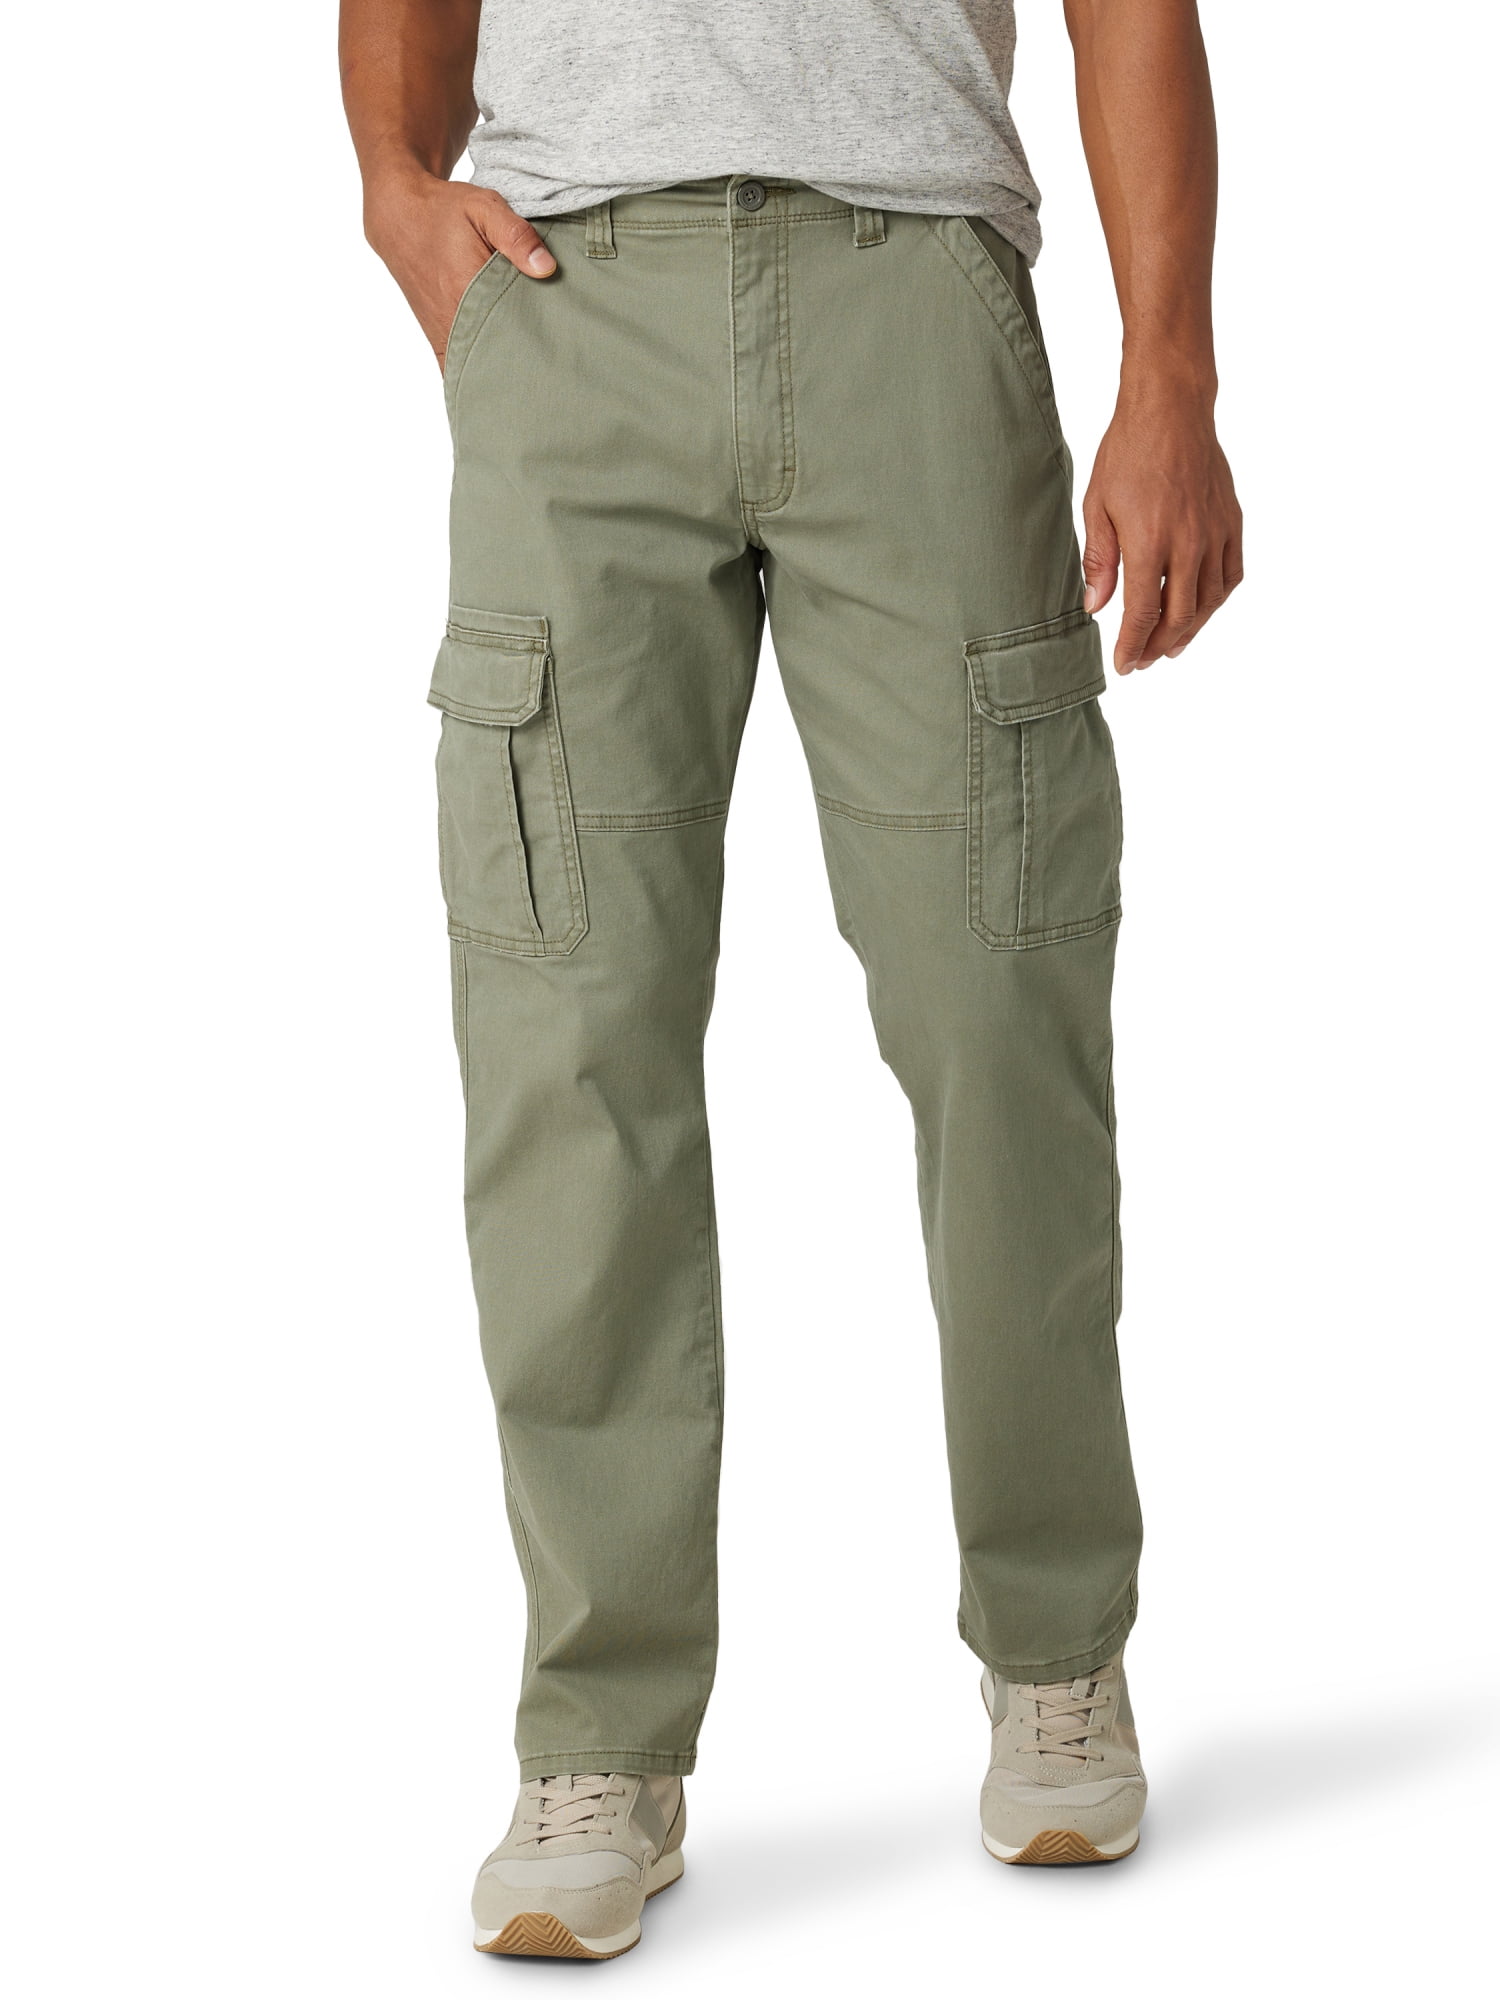 Mens Wrangler Relaxed Fit Stretch Cargo Pants Tan Size 38x30 Relaxed Seat  for sale online | eBay